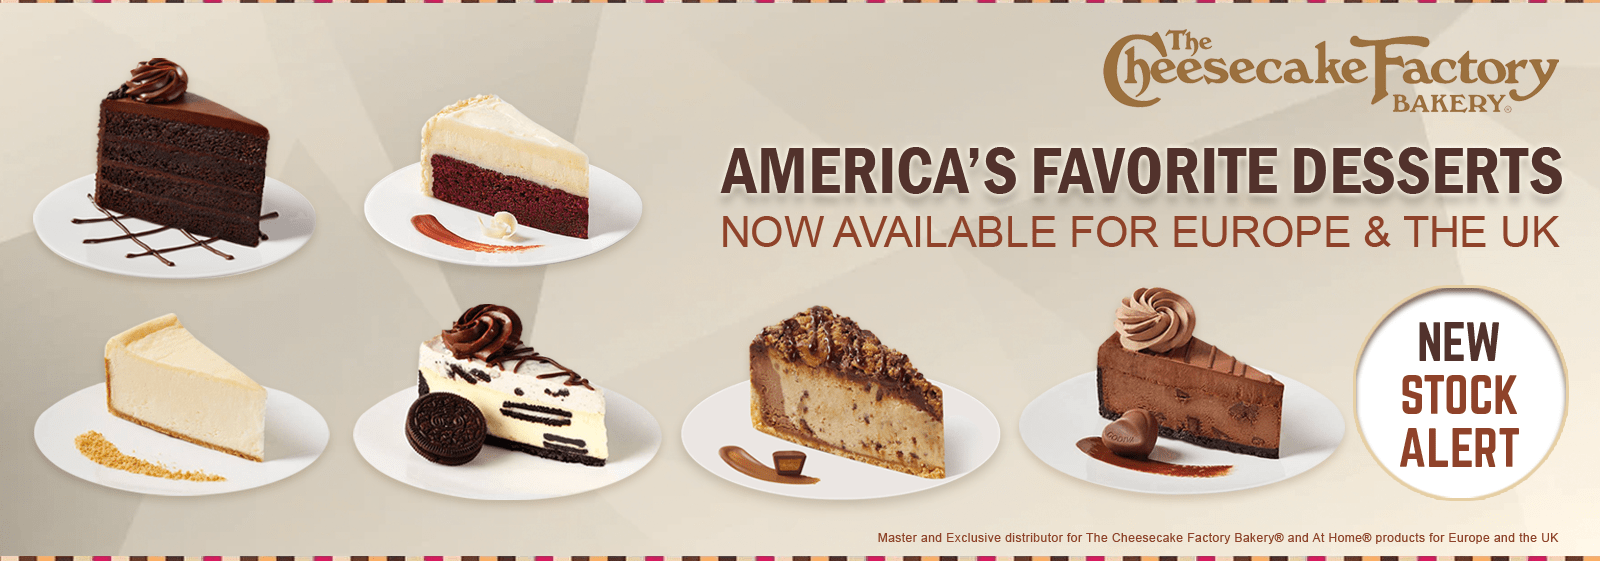 The Cheesecake Factory Cheesecakes for UK & Europe